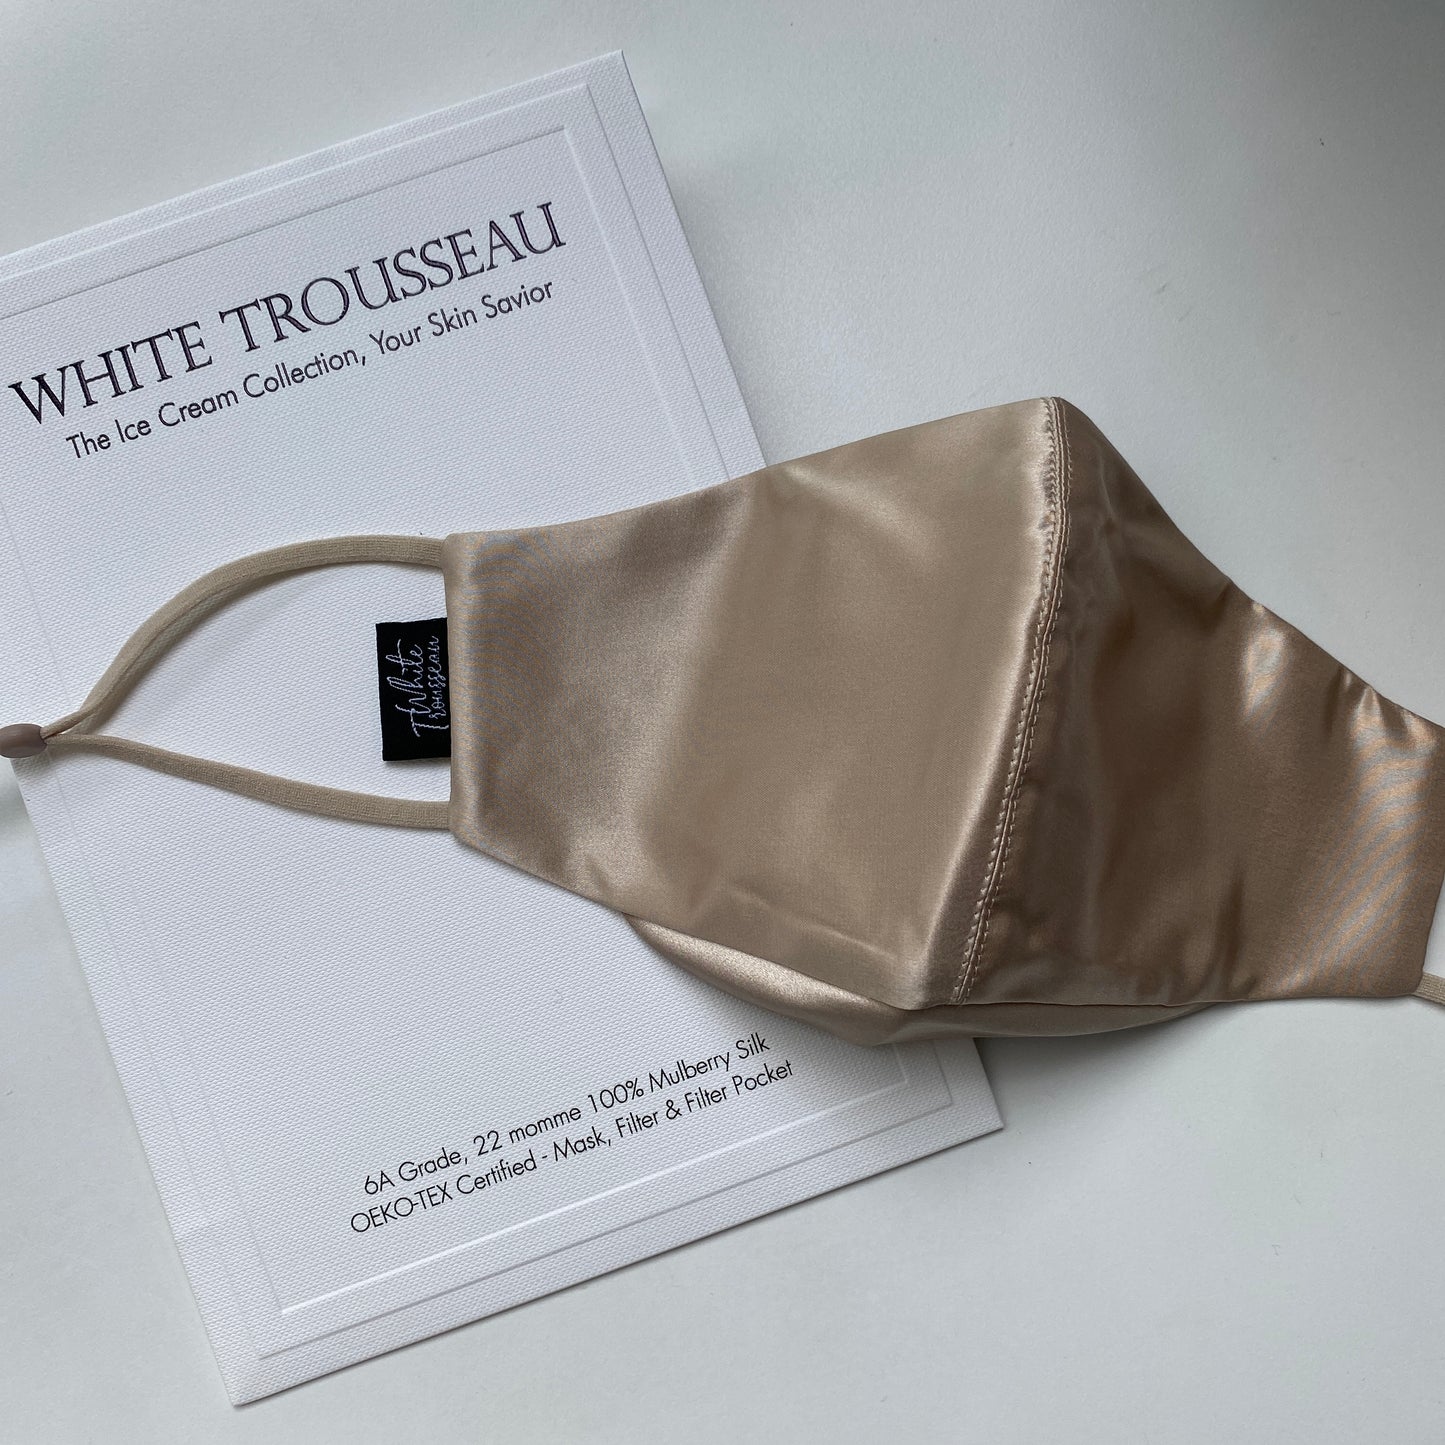 White trousseau silk mask beautiful packed. Designed to protect your face while looking elegant. Our silk mask is gentle on skin and prevents from irritation. Invest now in White Trousseau's mulberry silk mask.